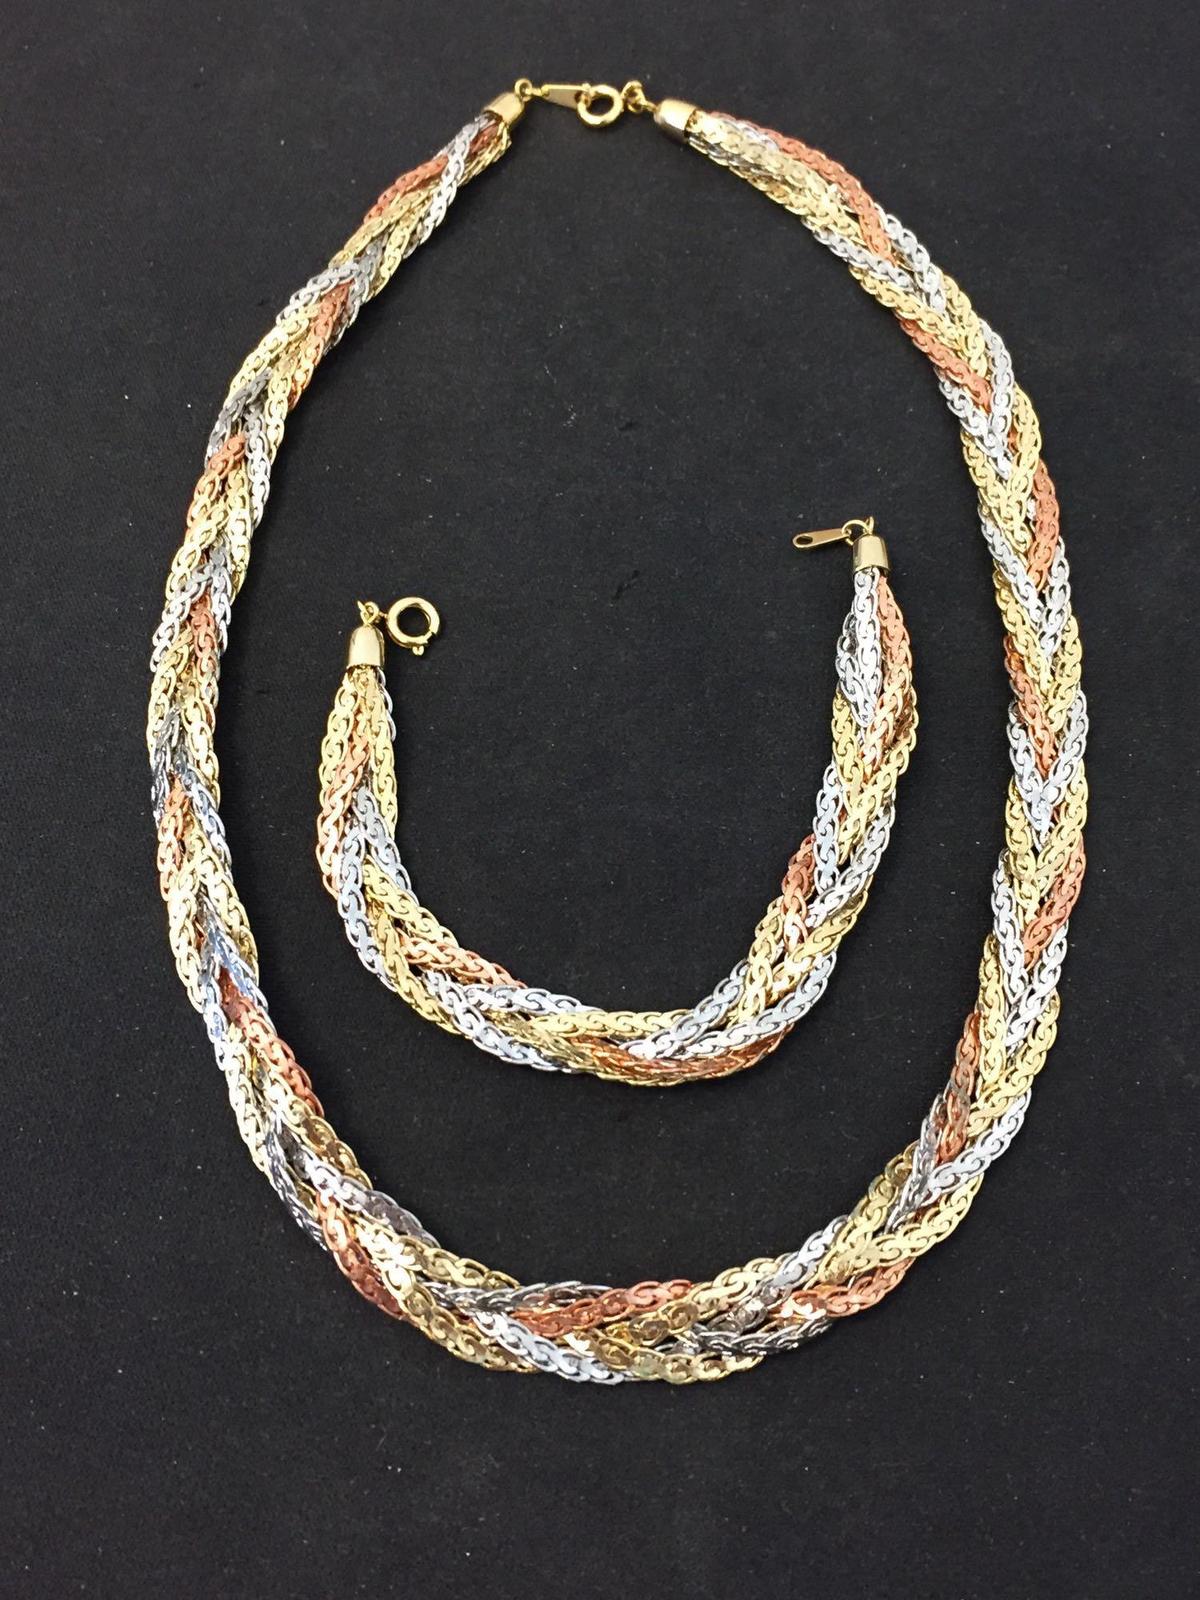 Lot of Two Matched Set 10 mm Wide Tri-Tone Woven Serpentine 18" Necklace & 7" Bracelet